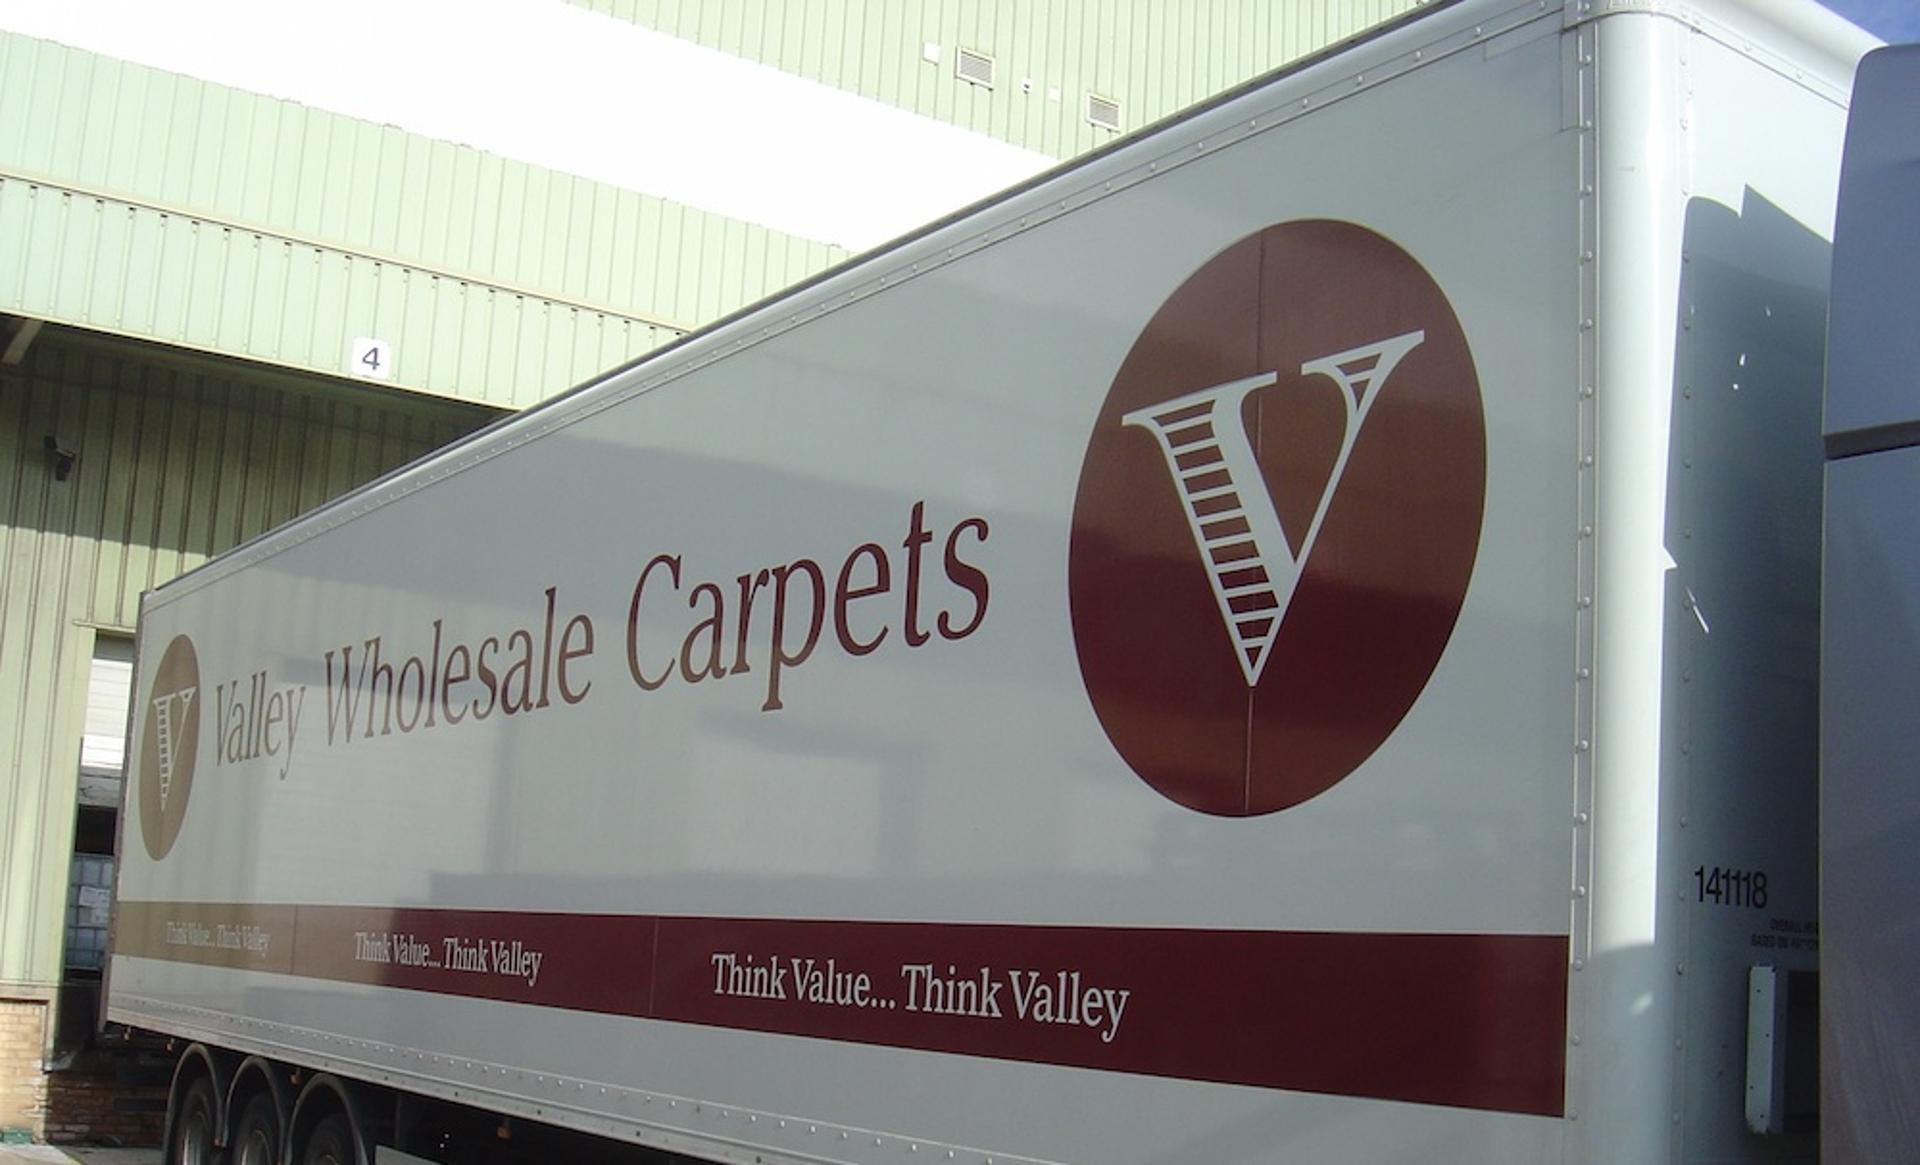 Likewise Group acquires Valley Wholesale Carpets at 5.2x EBITDA